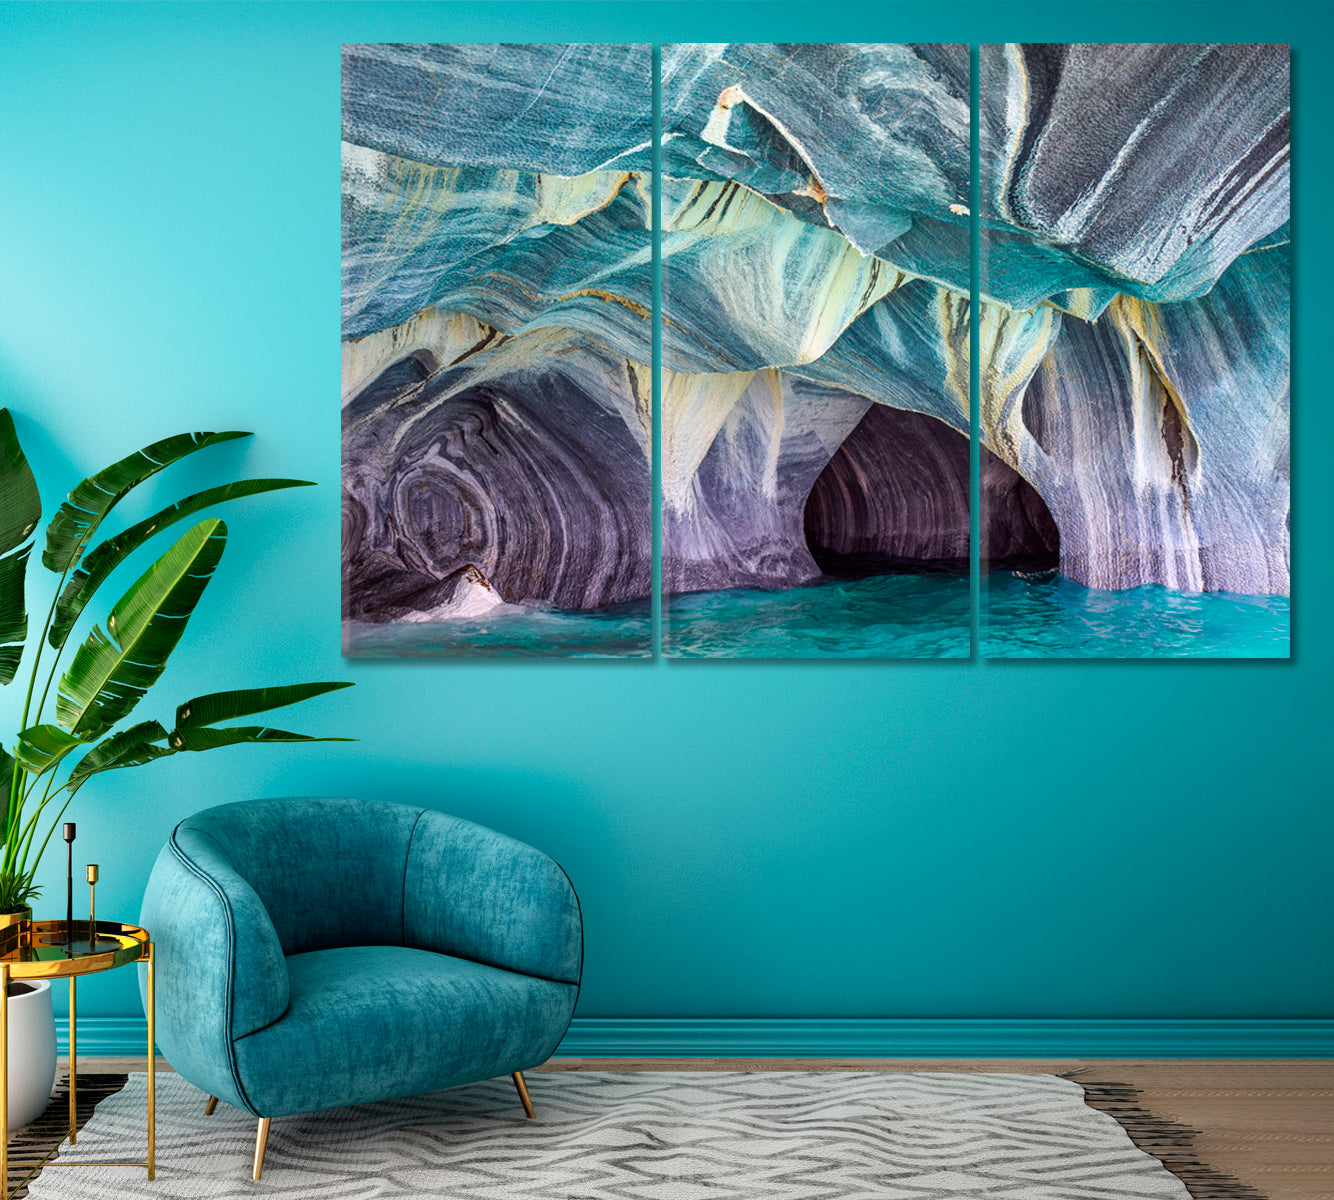 Marble Caves in Chile Patagonia Canvas Print ArtLexy 3 Panels 36"x24" inches 